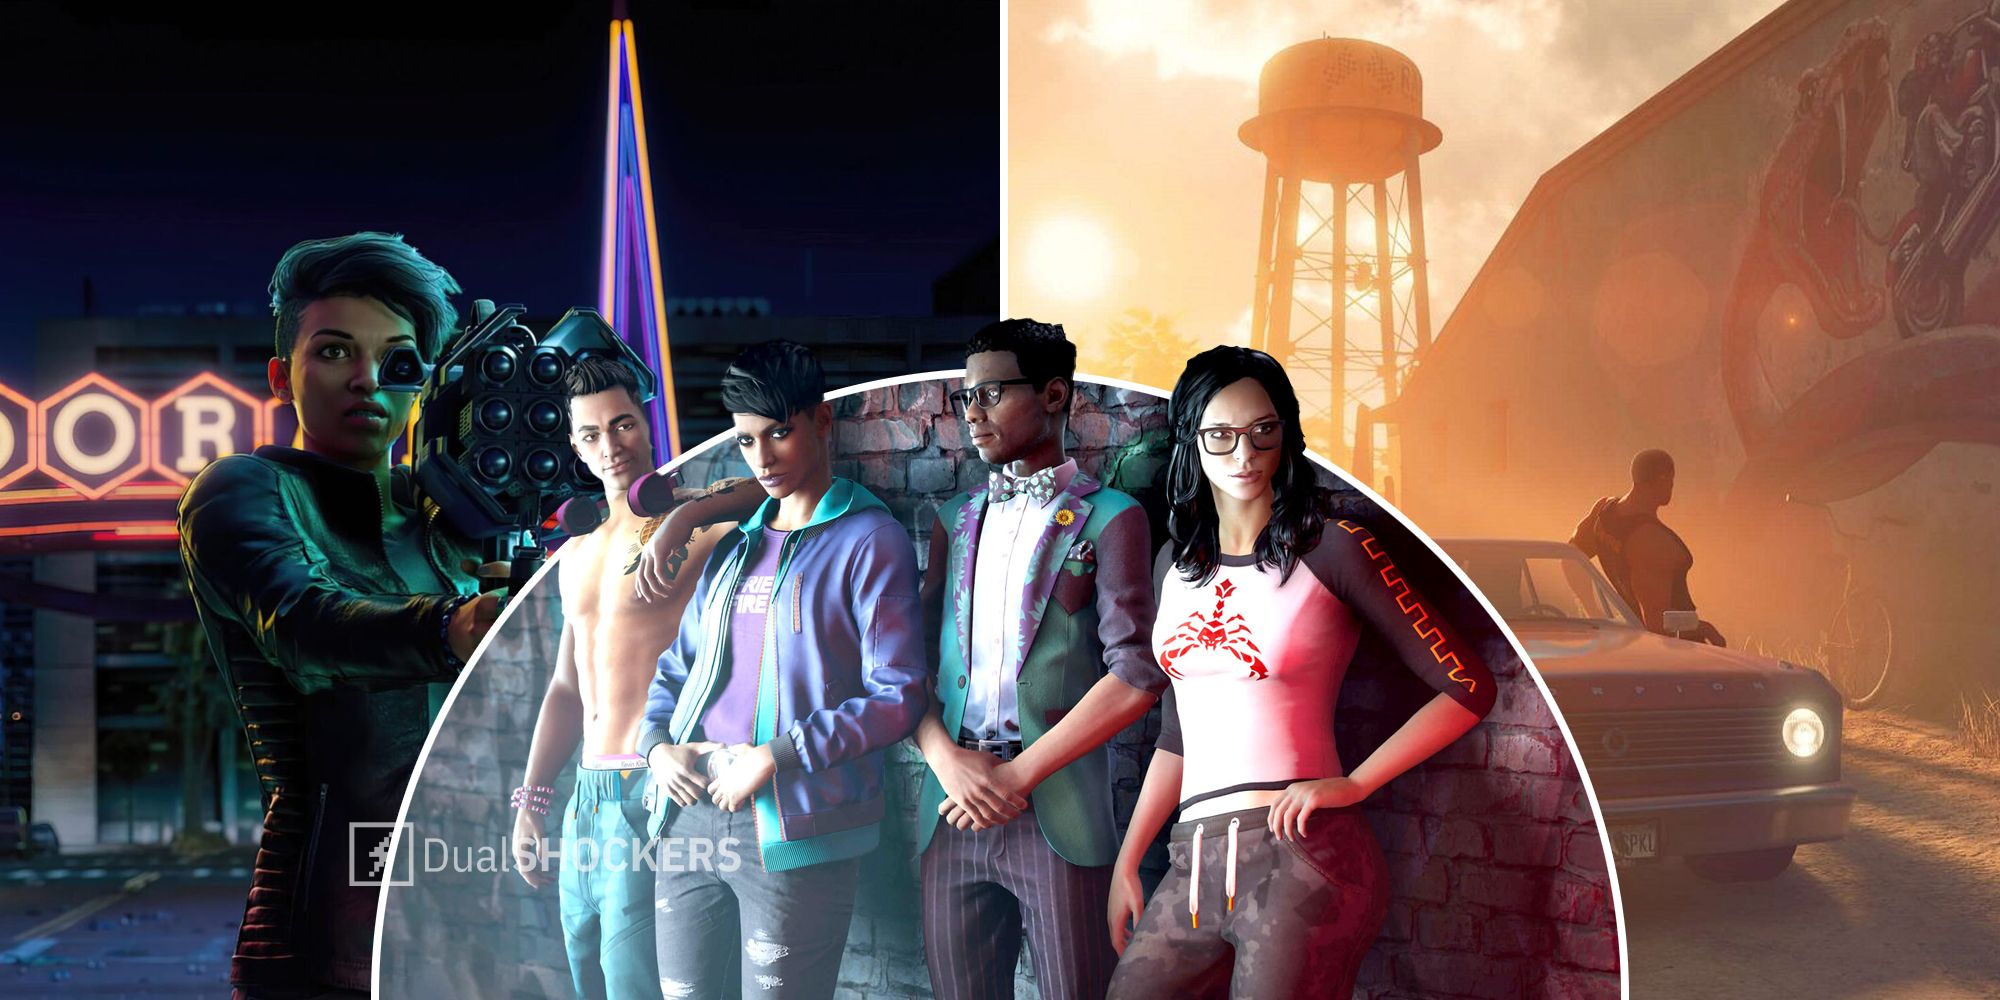 Saints Row gameplay and characters